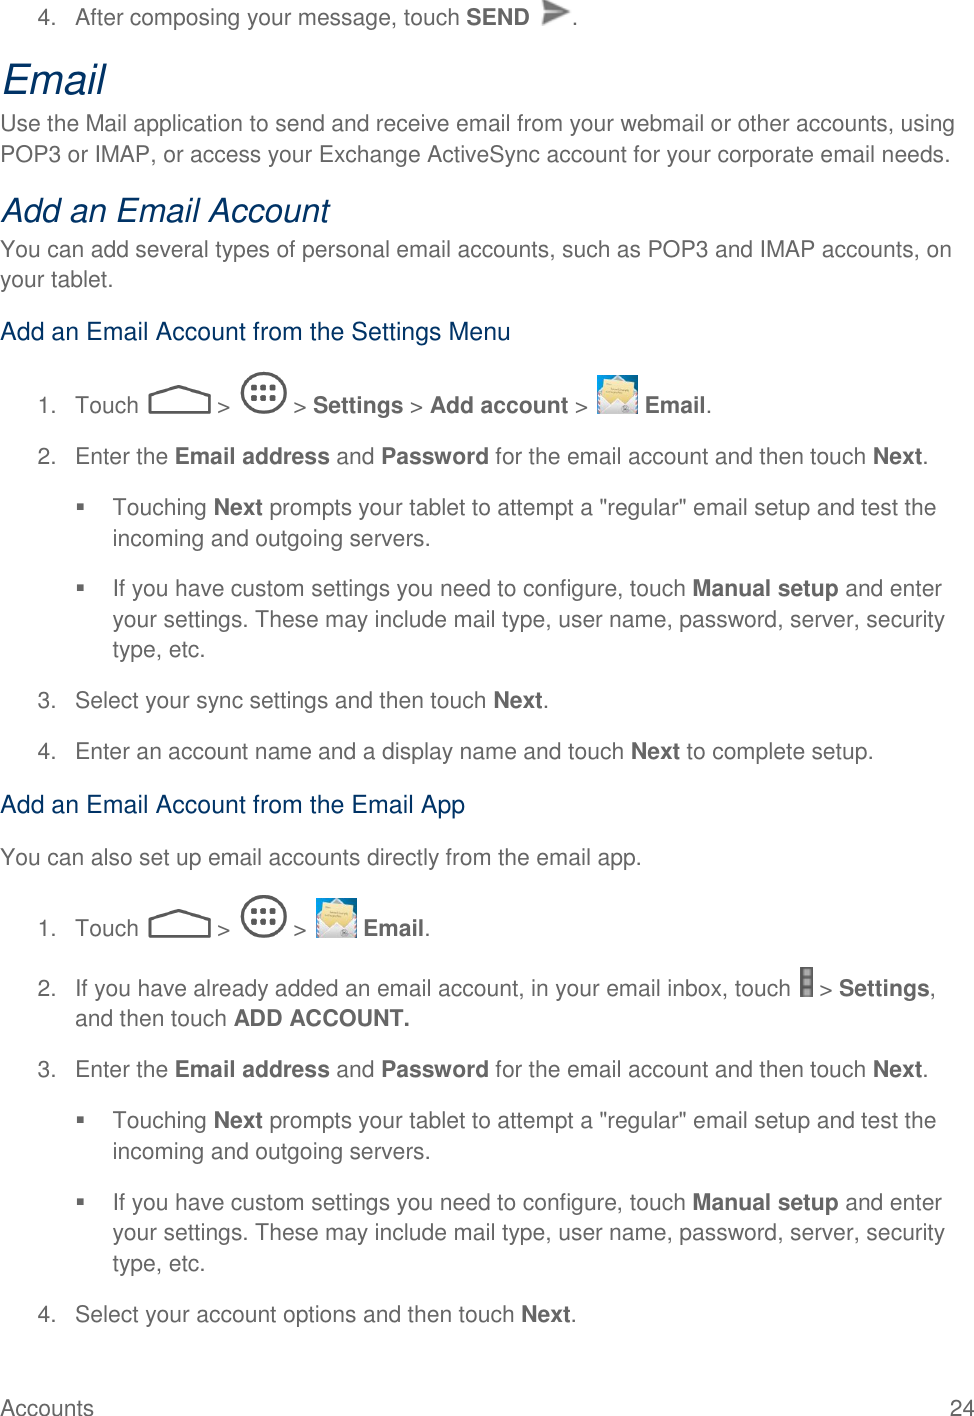  Accounts  24 4.  After composing your message, touch SEND  . Email Use the Mail application to send and receive email from your webmail or other accounts, using POP3 or IMAP, or access your Exchange ActiveSync account for your corporate email needs. Add an Email Account  You can add several types of personal email accounts, such as POP3 and IMAP accounts, on your tablet. Add an Email Account from the Settings Menu 1.  Touch   &gt;   &gt; Settings &gt; Add account &gt;   Email. 2.  Enter the Email address and Password for the email account and then touch Next.   Touching Next prompts your tablet to attempt a &quot;regular&quot; email setup and test the incoming and outgoing servers.    If you have custom settings you need to configure, touch Manual setup and enter your settings. These may include mail type, user name, password, server, security type, etc. 3.  Select your sync settings and then touch Next.  4.  Enter an account name and a display name and touch Next to complete setup. Add an Email Account from the Email App You can also set up email accounts directly from the email app. 1.  Touch   &gt;   &gt;   Email. 2.  If you have already added an email account, in your email inbox, touch   &gt; Settings, and then touch ADD ACCOUNT.  3.  Enter the Email address and Password for the email account and then touch Next.   Touching Next prompts your tablet to attempt a &quot;regular&quot; email setup and test the incoming and outgoing servers.    If you have custom settings you need to configure, touch Manual setup and enter your settings. These may include mail type, user name, password, server, security type, etc. 4.  Select your account options and then touch Next.  